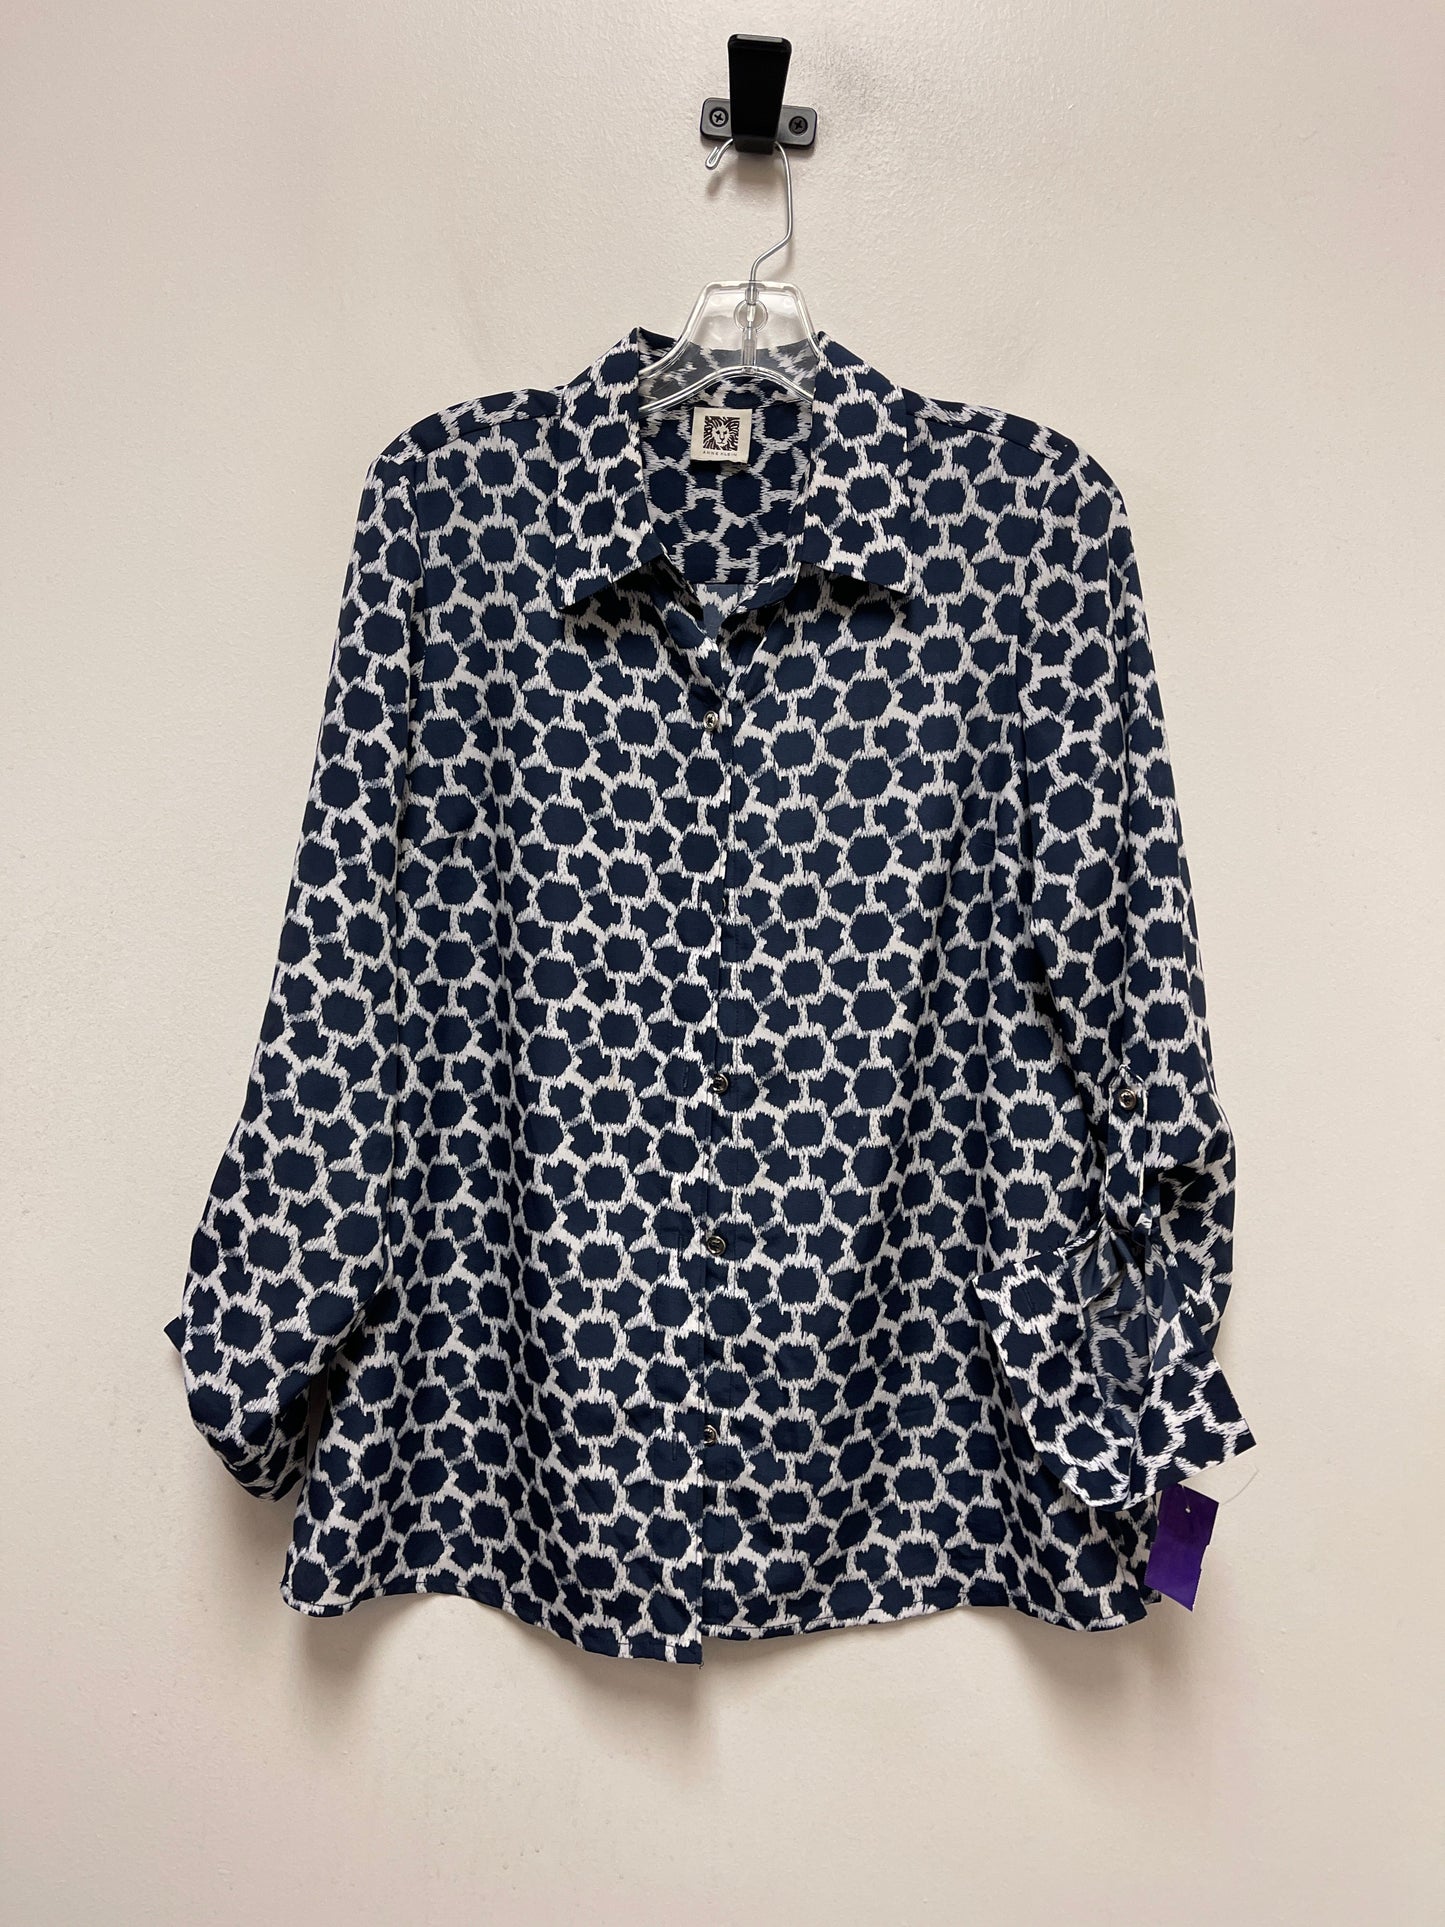 Navy Top Long Sleeve Anne Klein, Size M